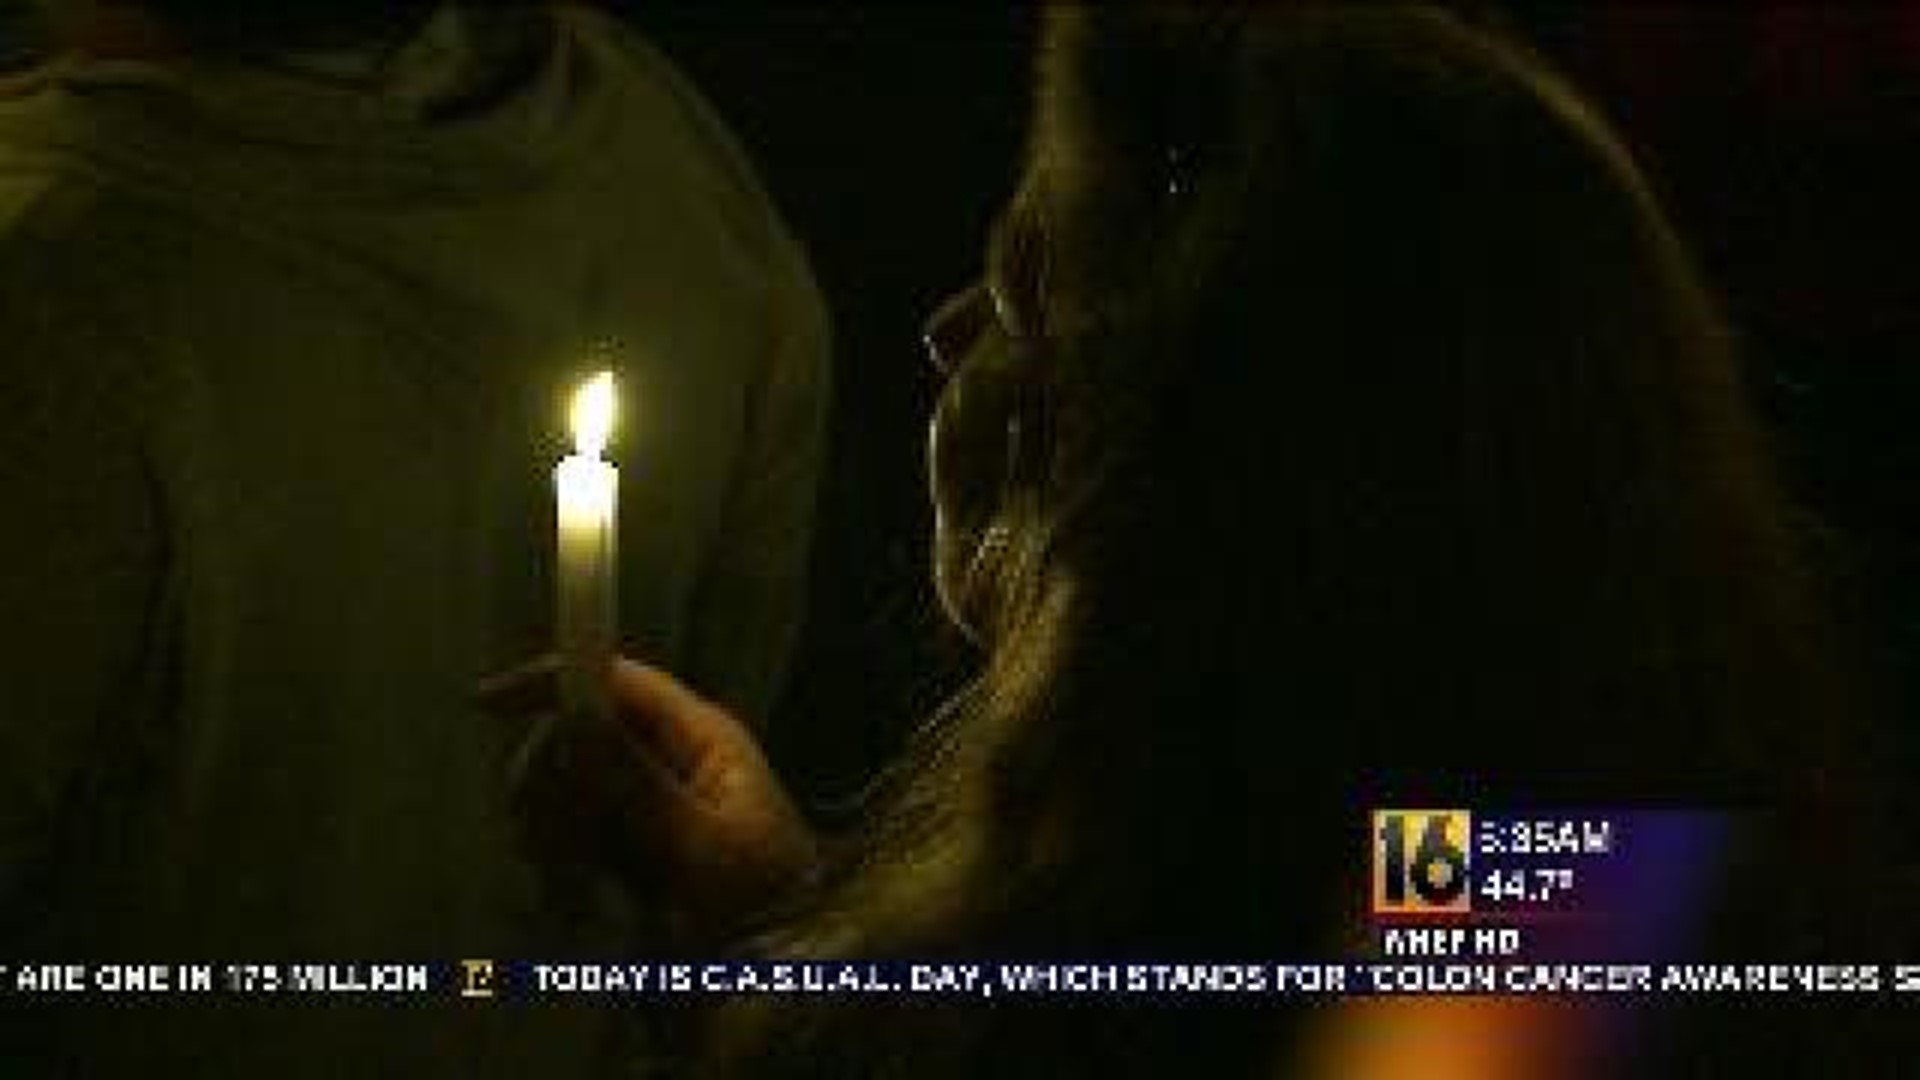 Candlelight Vigil To Remember Fire Victims